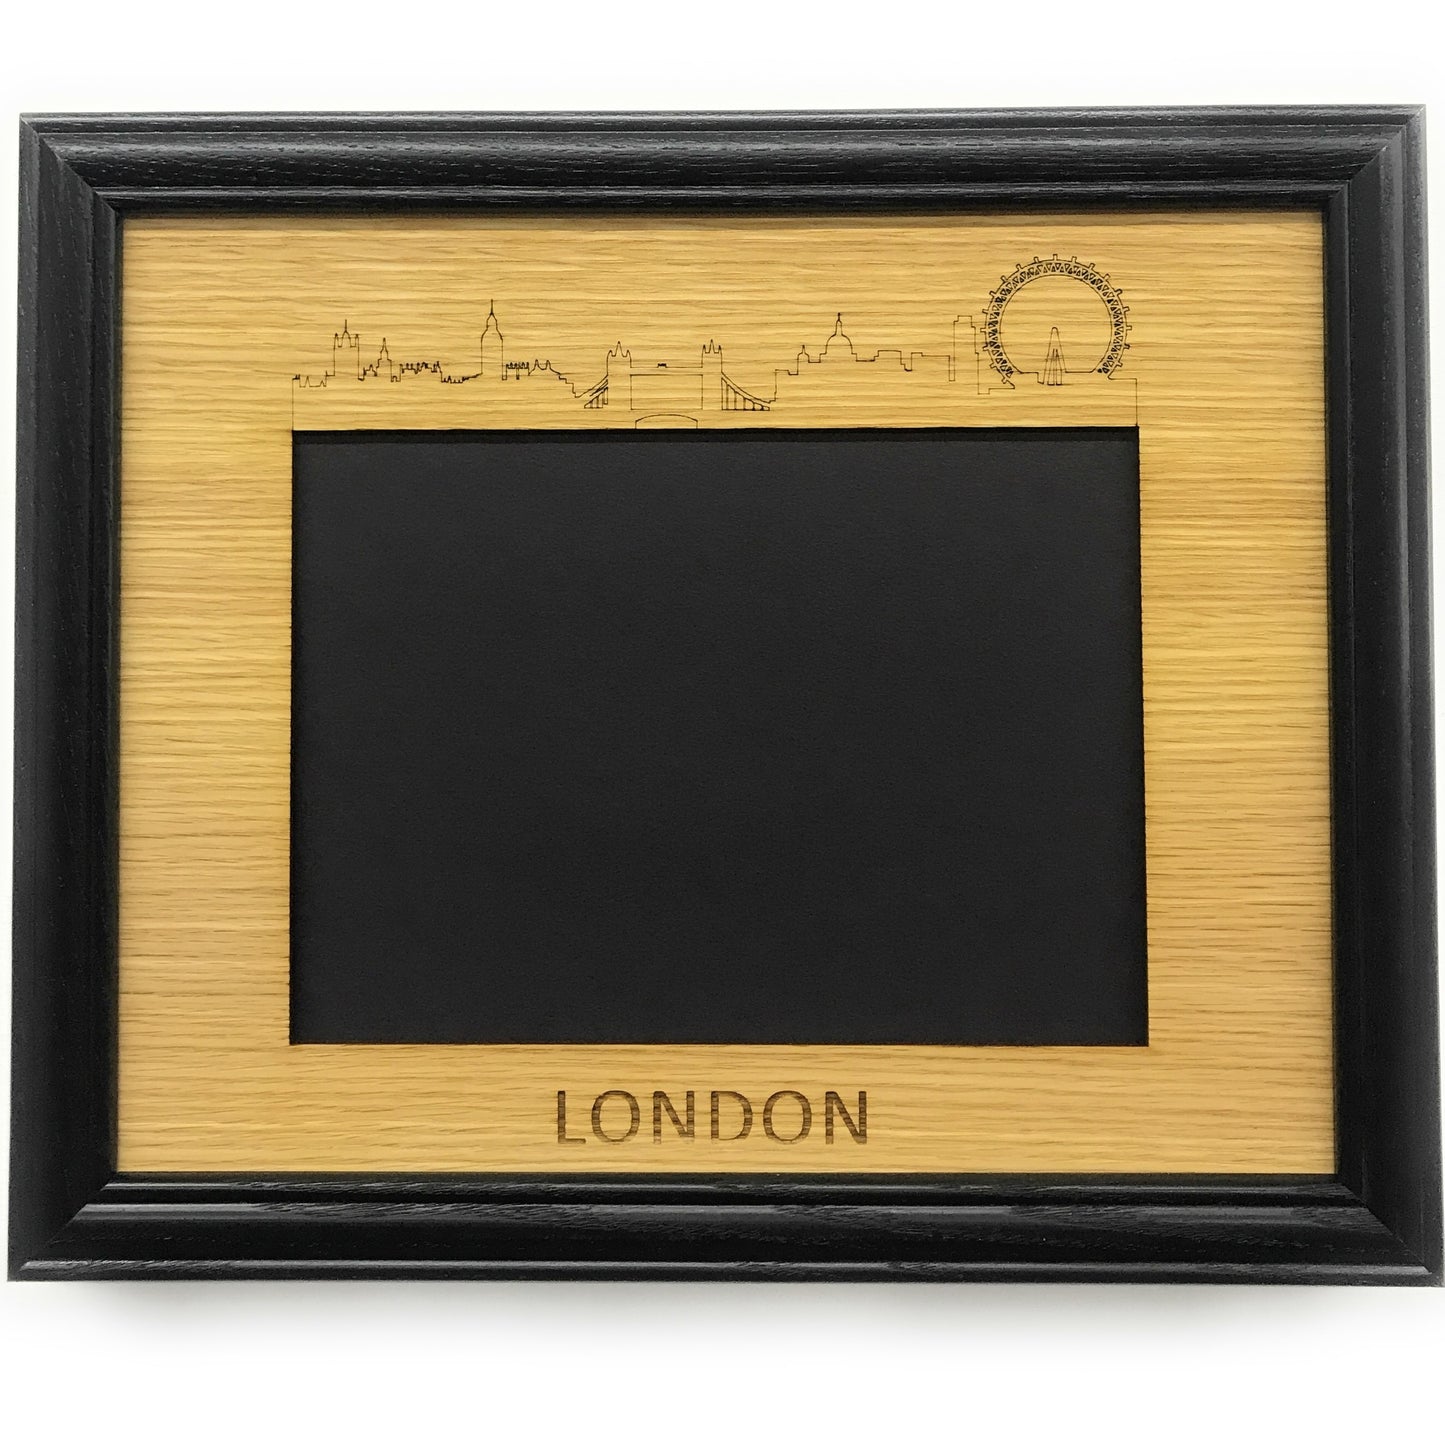 London Picture Frame - 8x10 Frame Hold 5x7 Photo